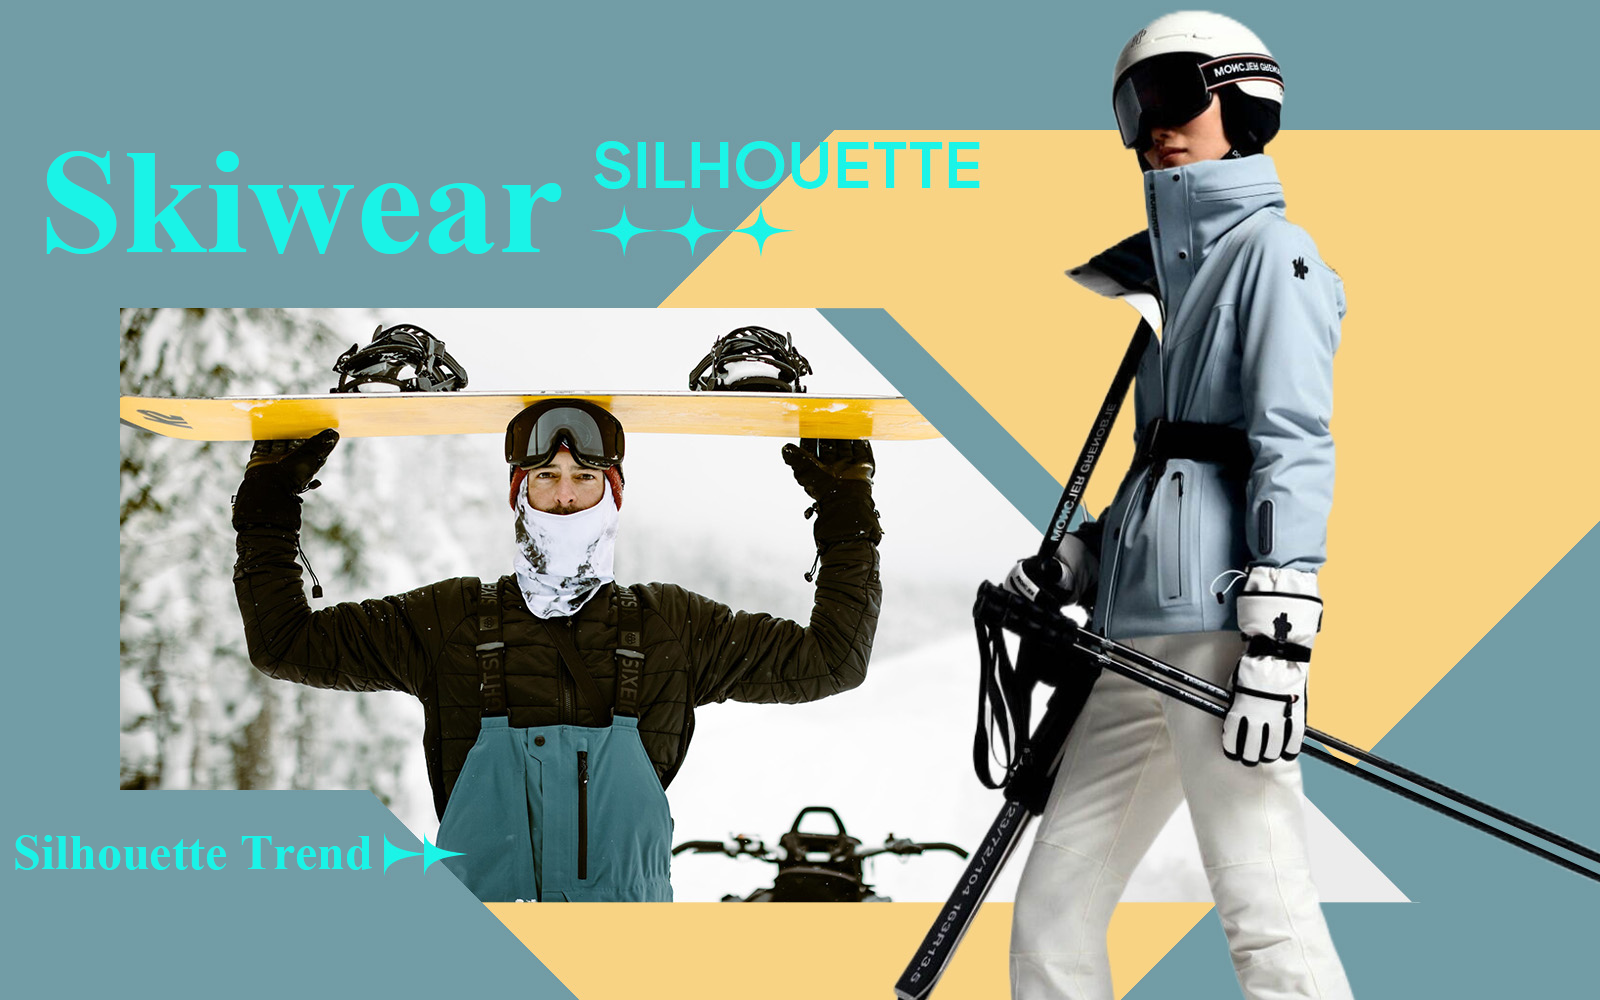 A Trip to the Snow Moutain -- The Silhouette Trend for Skiwear